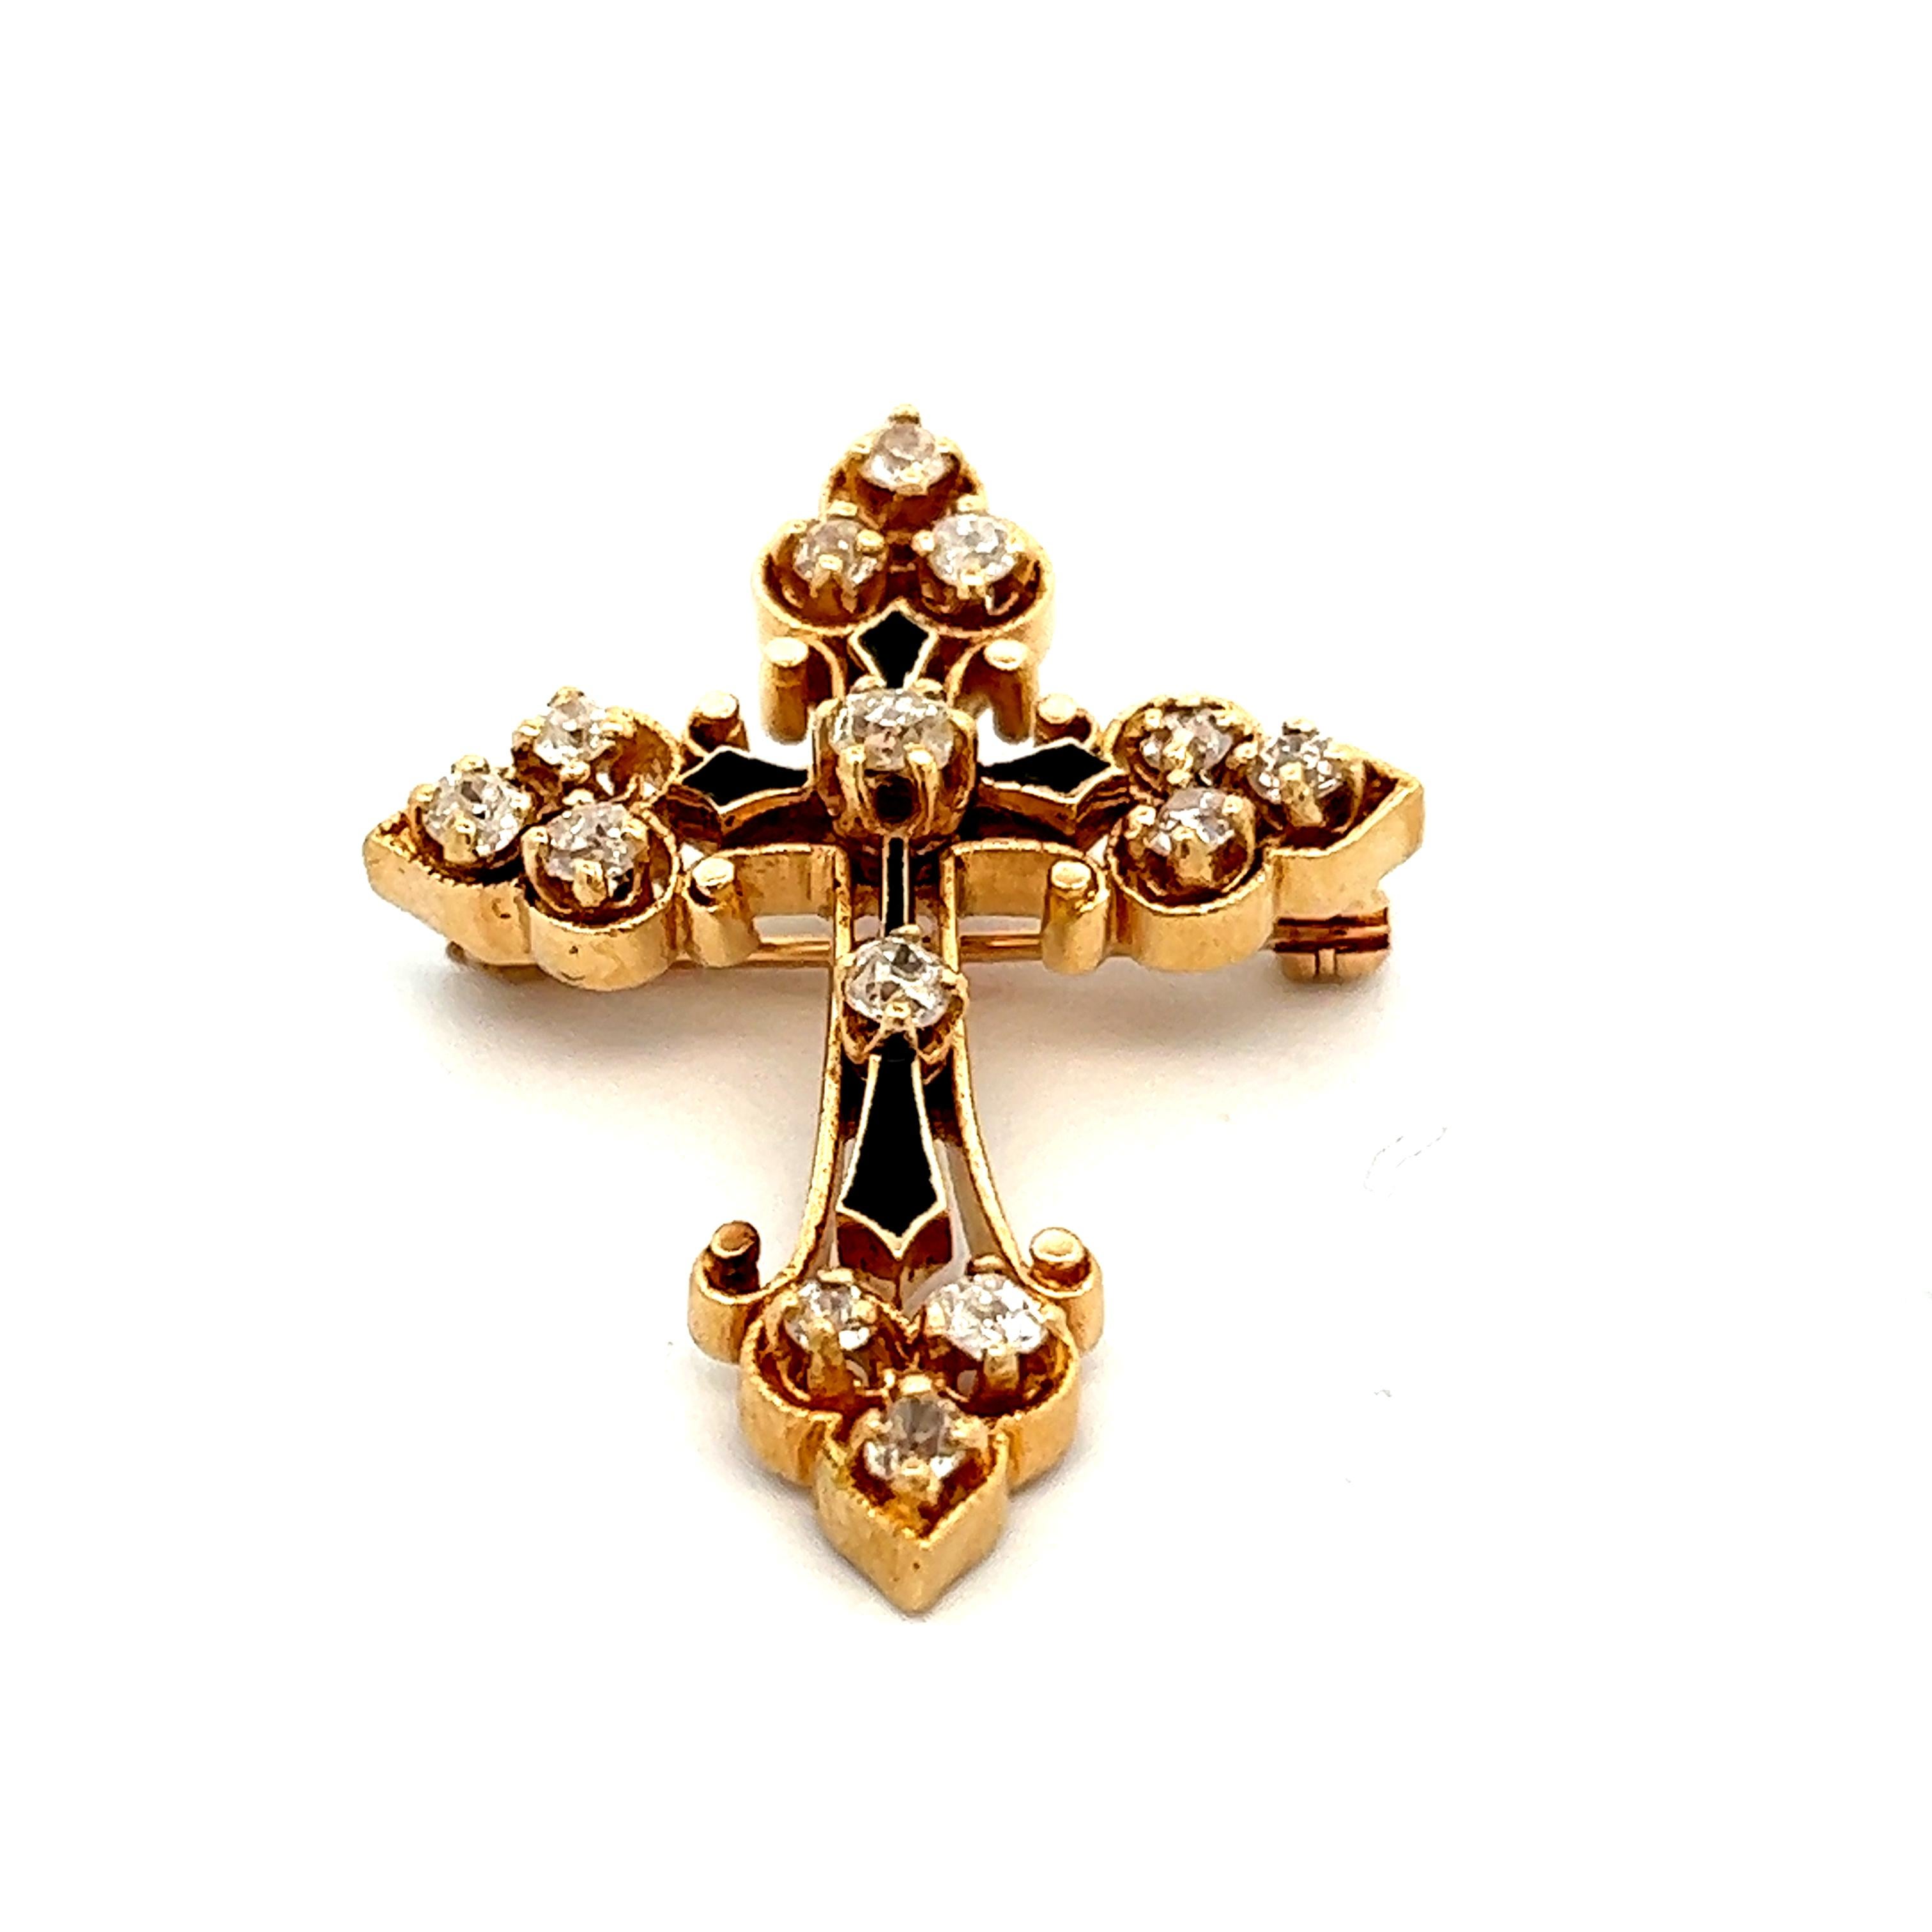 This beautiful yellow gold diamond cross features stunning enamel and a retractable bale. This cross has a unique retractable bale allowing this cross to be worn as both a pin and a pendant, making it the perfect accessory to go with any occasion.